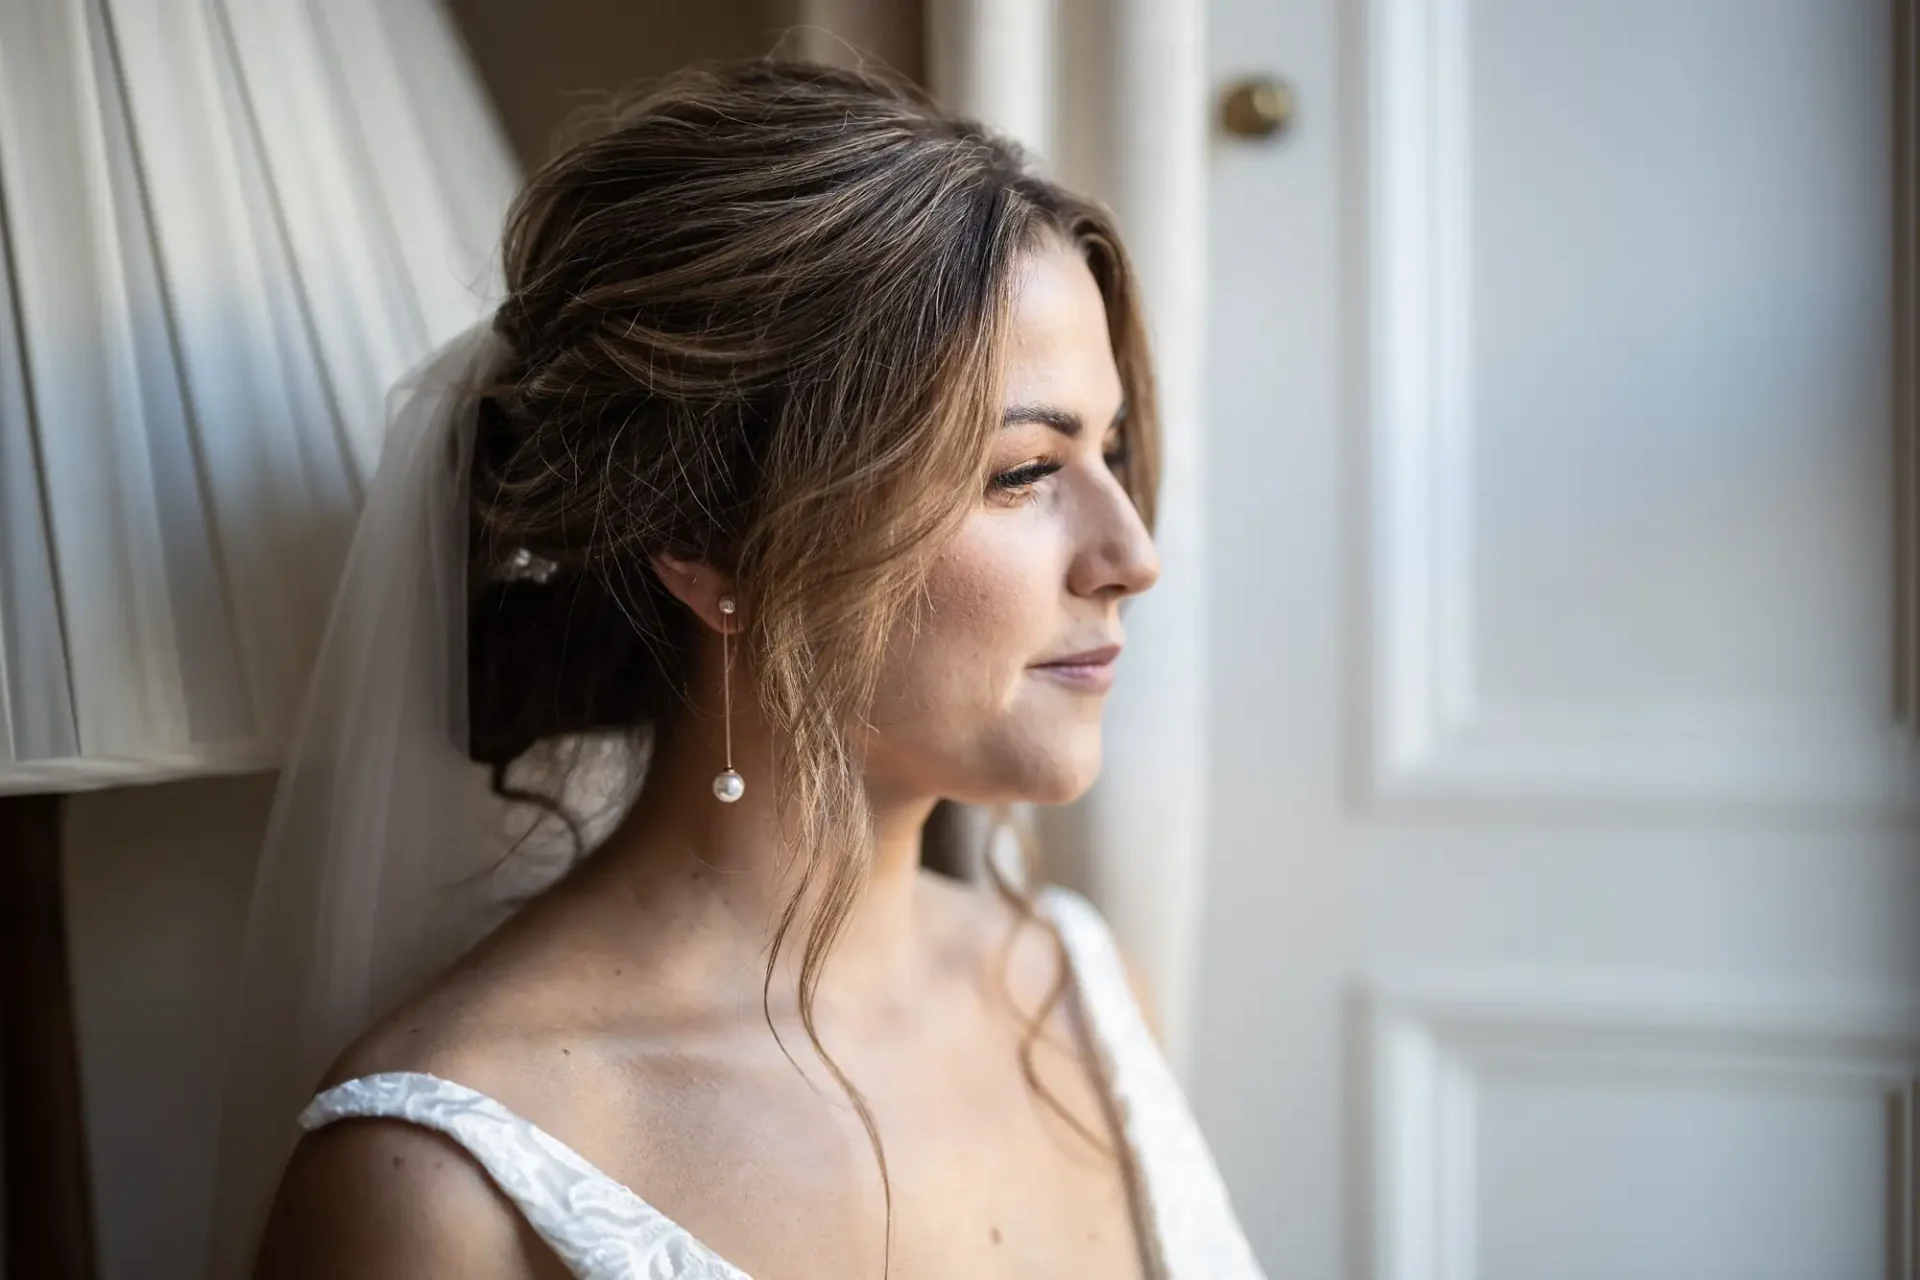 A bride in an off-shoulder wedding dress looks contemplative by a window, showcasing a styled updo with a veil and pearl earrings.